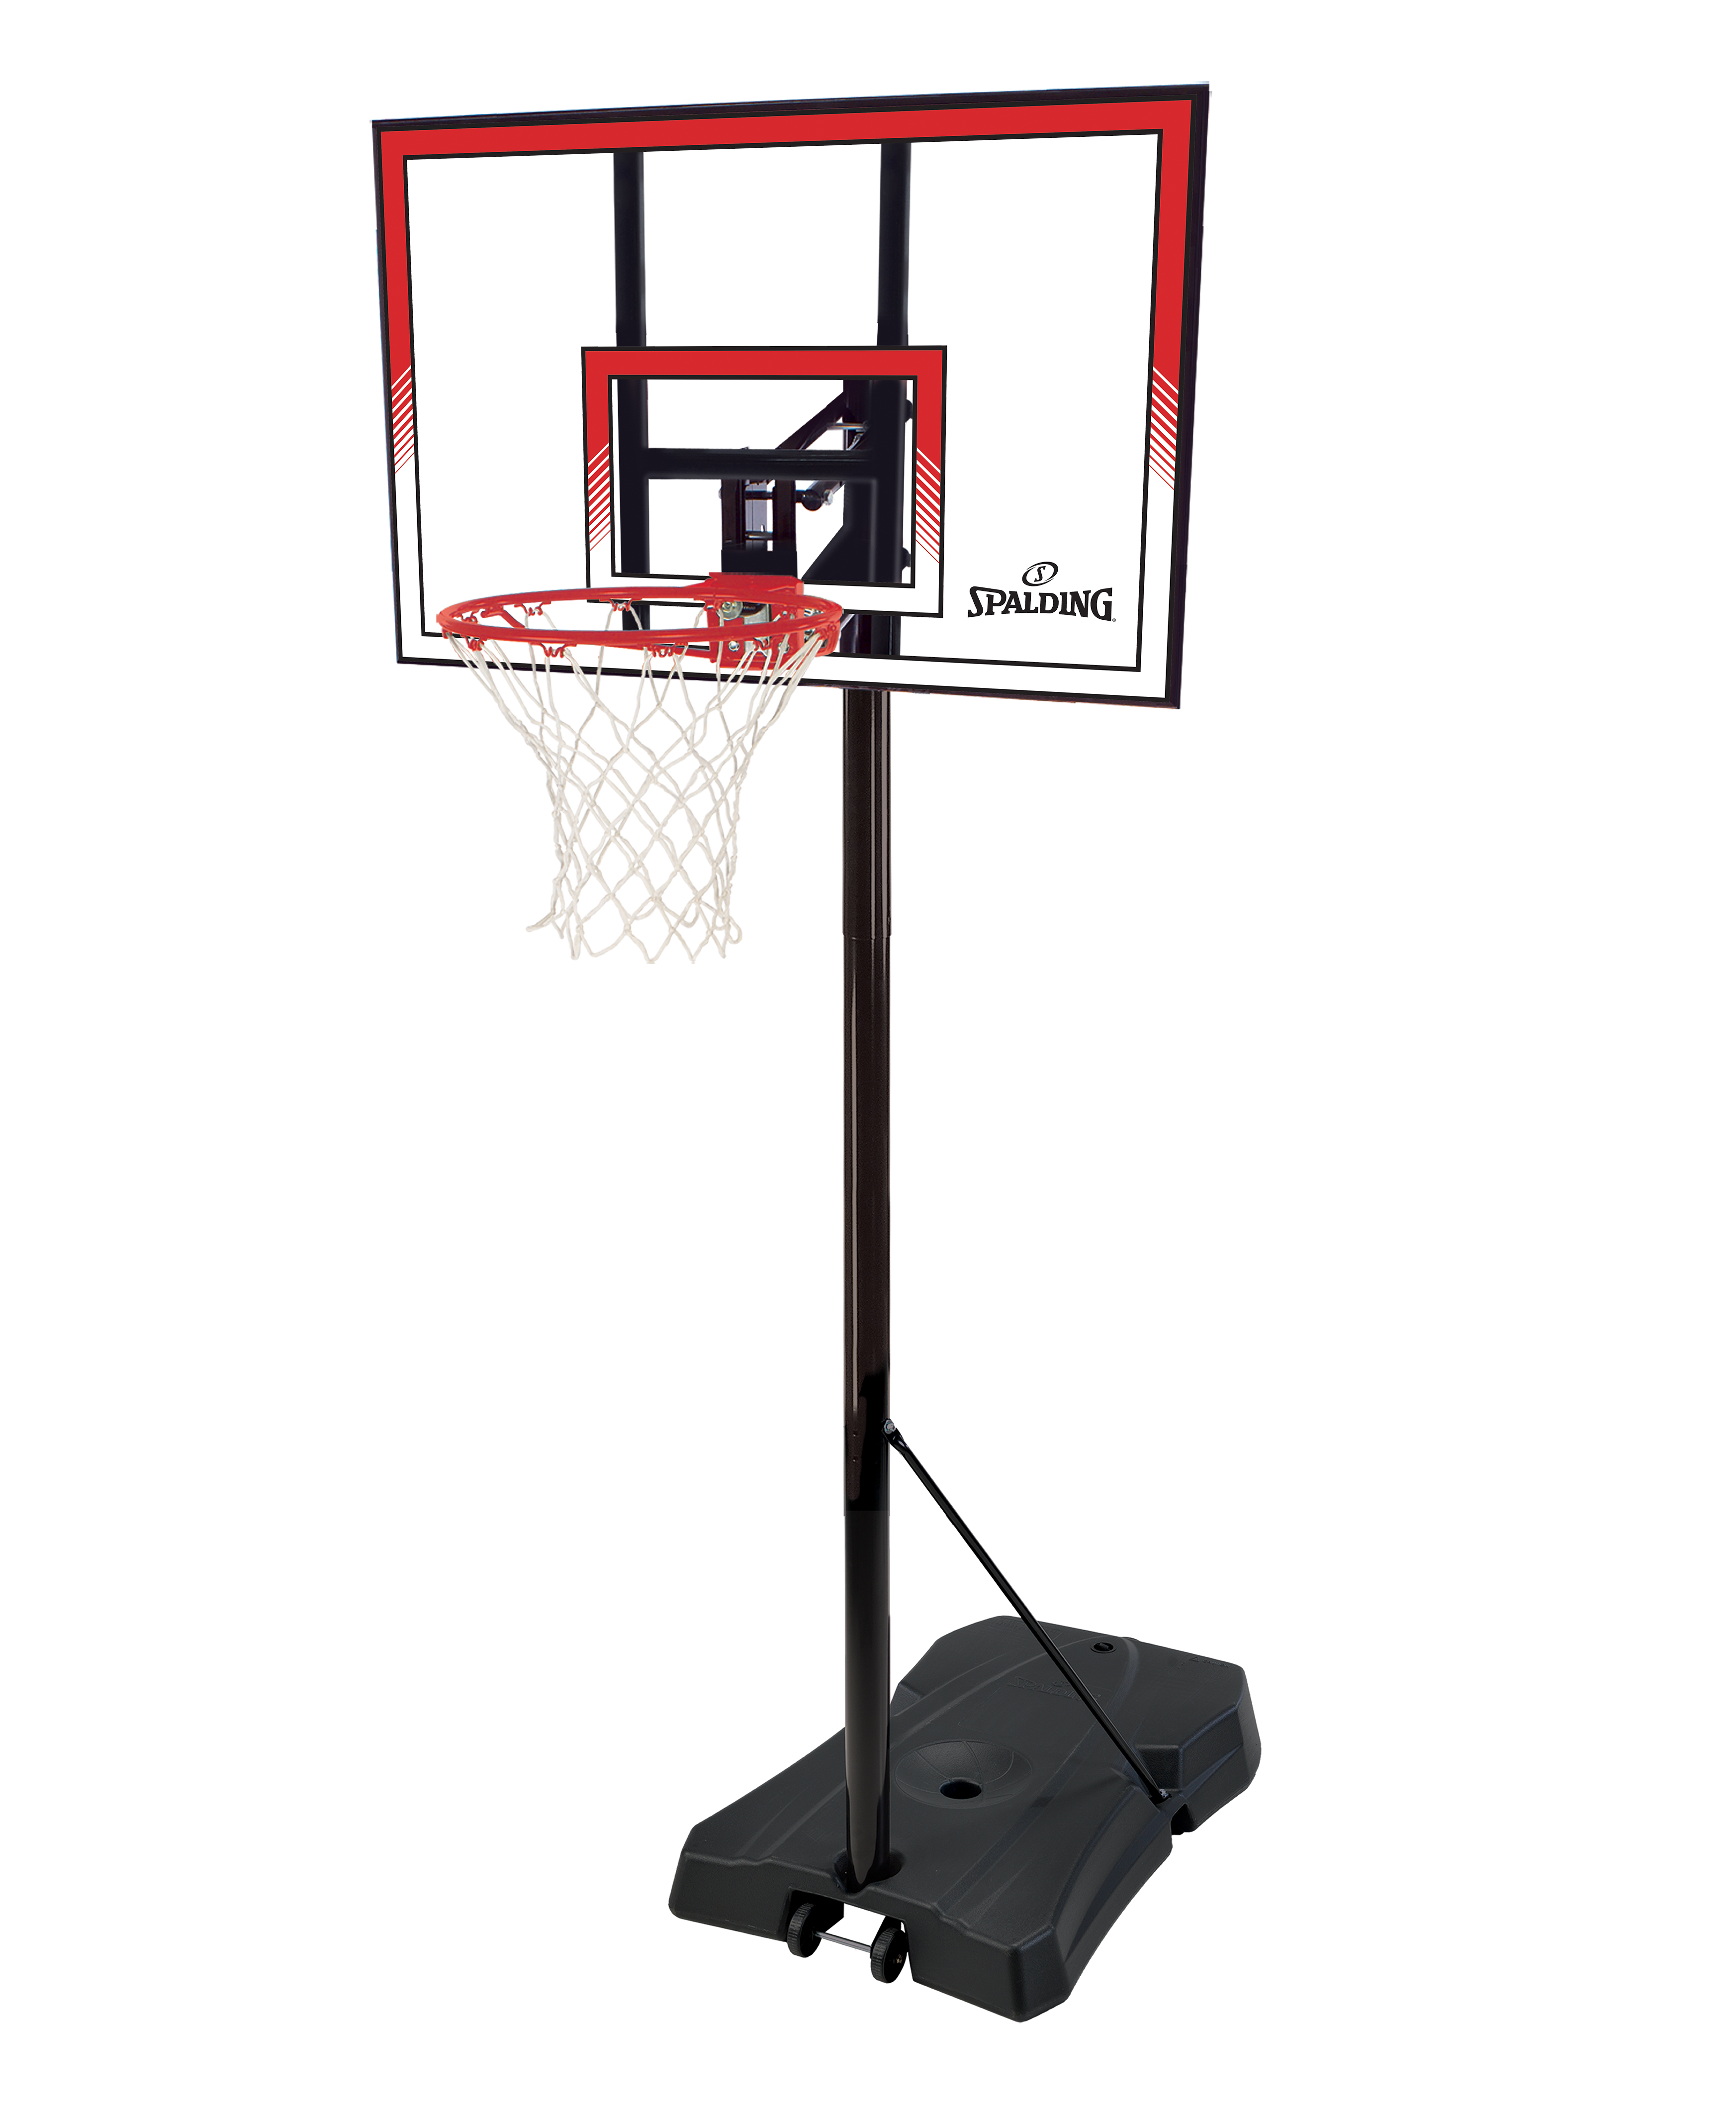 Spalding Ratchet Lift 44 In. Polycarbonate Portable Basketball Hoop System - image 1 of 6